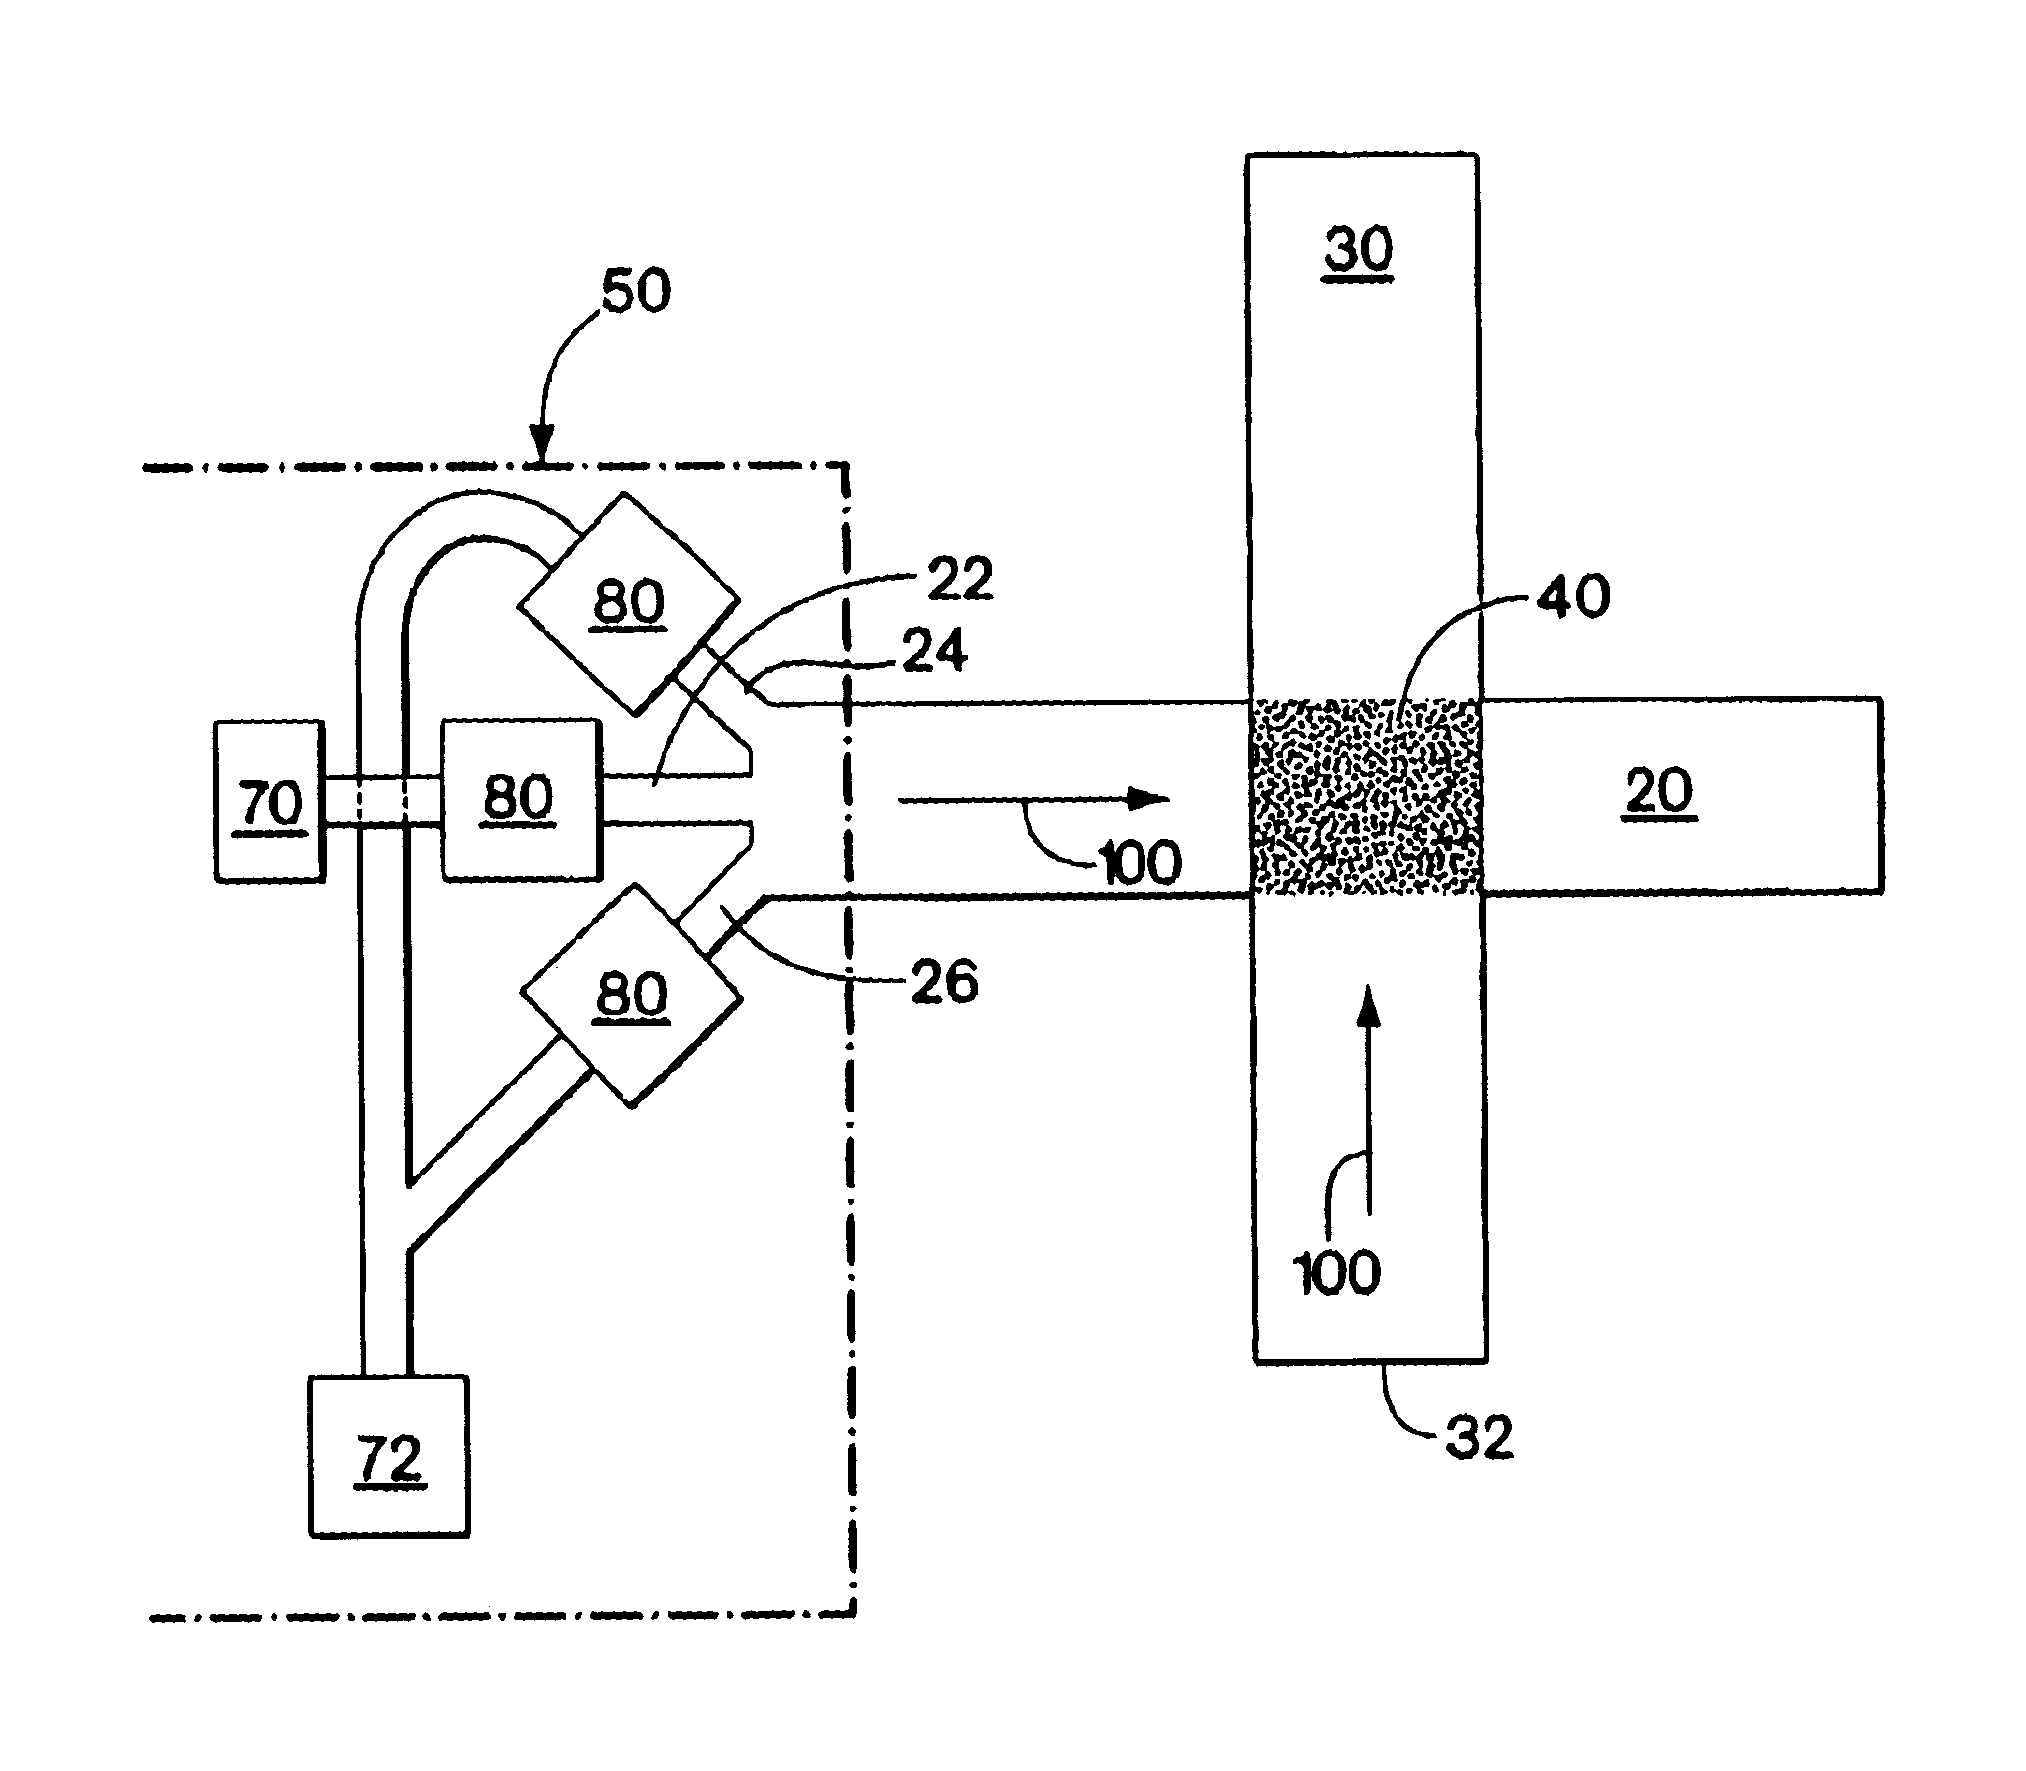 Fluidic switches and methods for controlling flow in fluidic systems